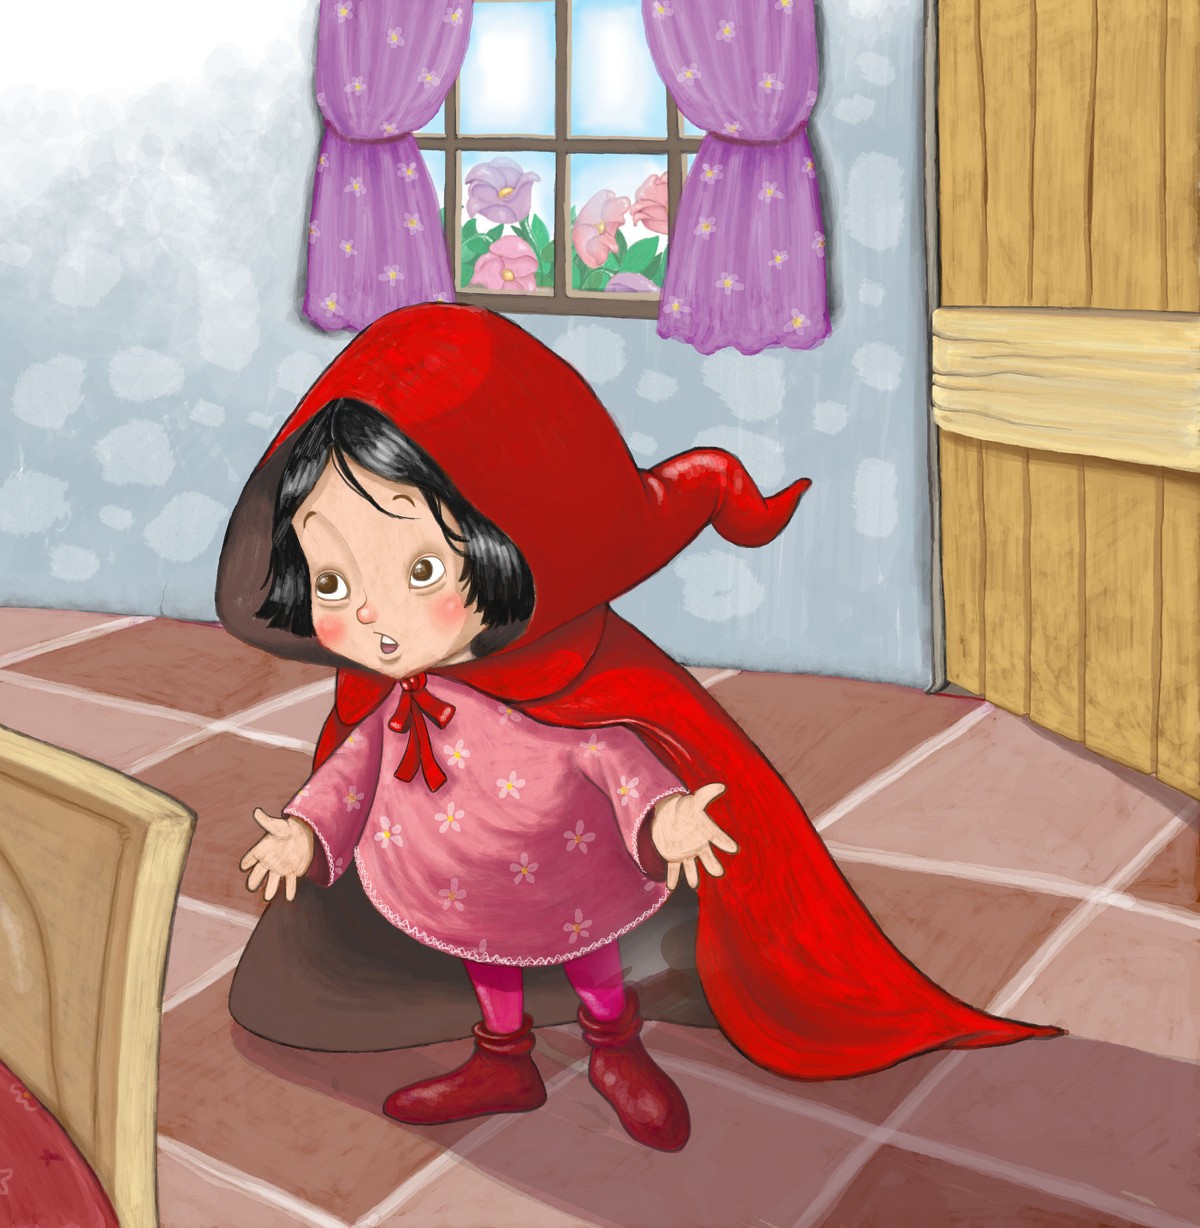 illustration detail from "Little Red Riding Hood", an educational rewrite of the classic novel for children